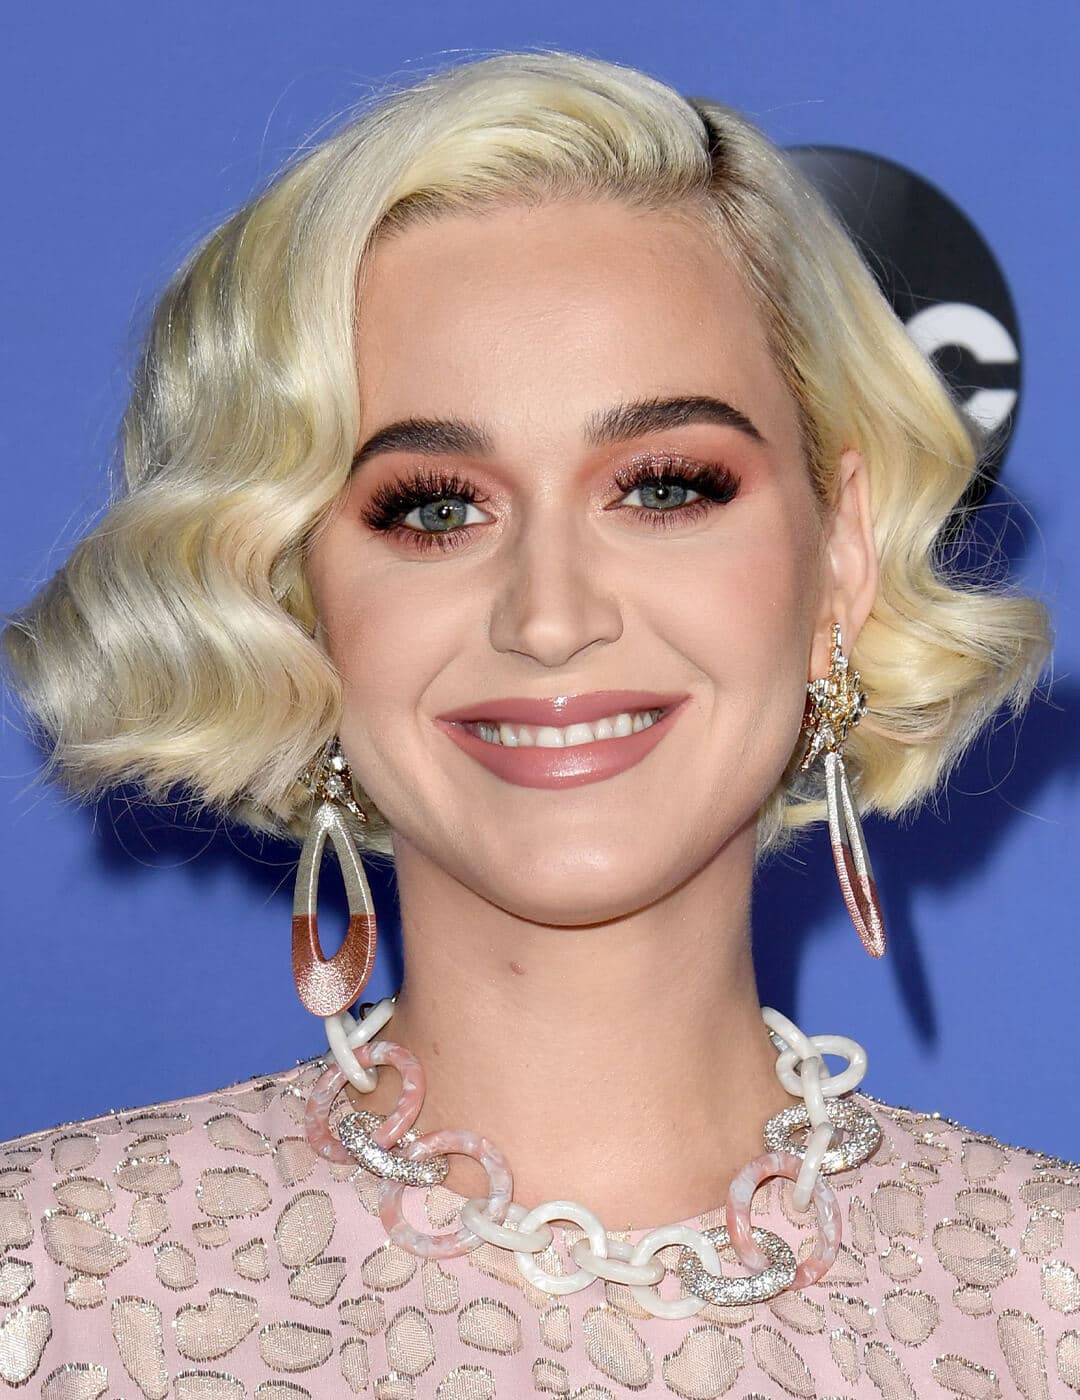 Katy Perry rocking French bob hairstyle and neutral makeup look